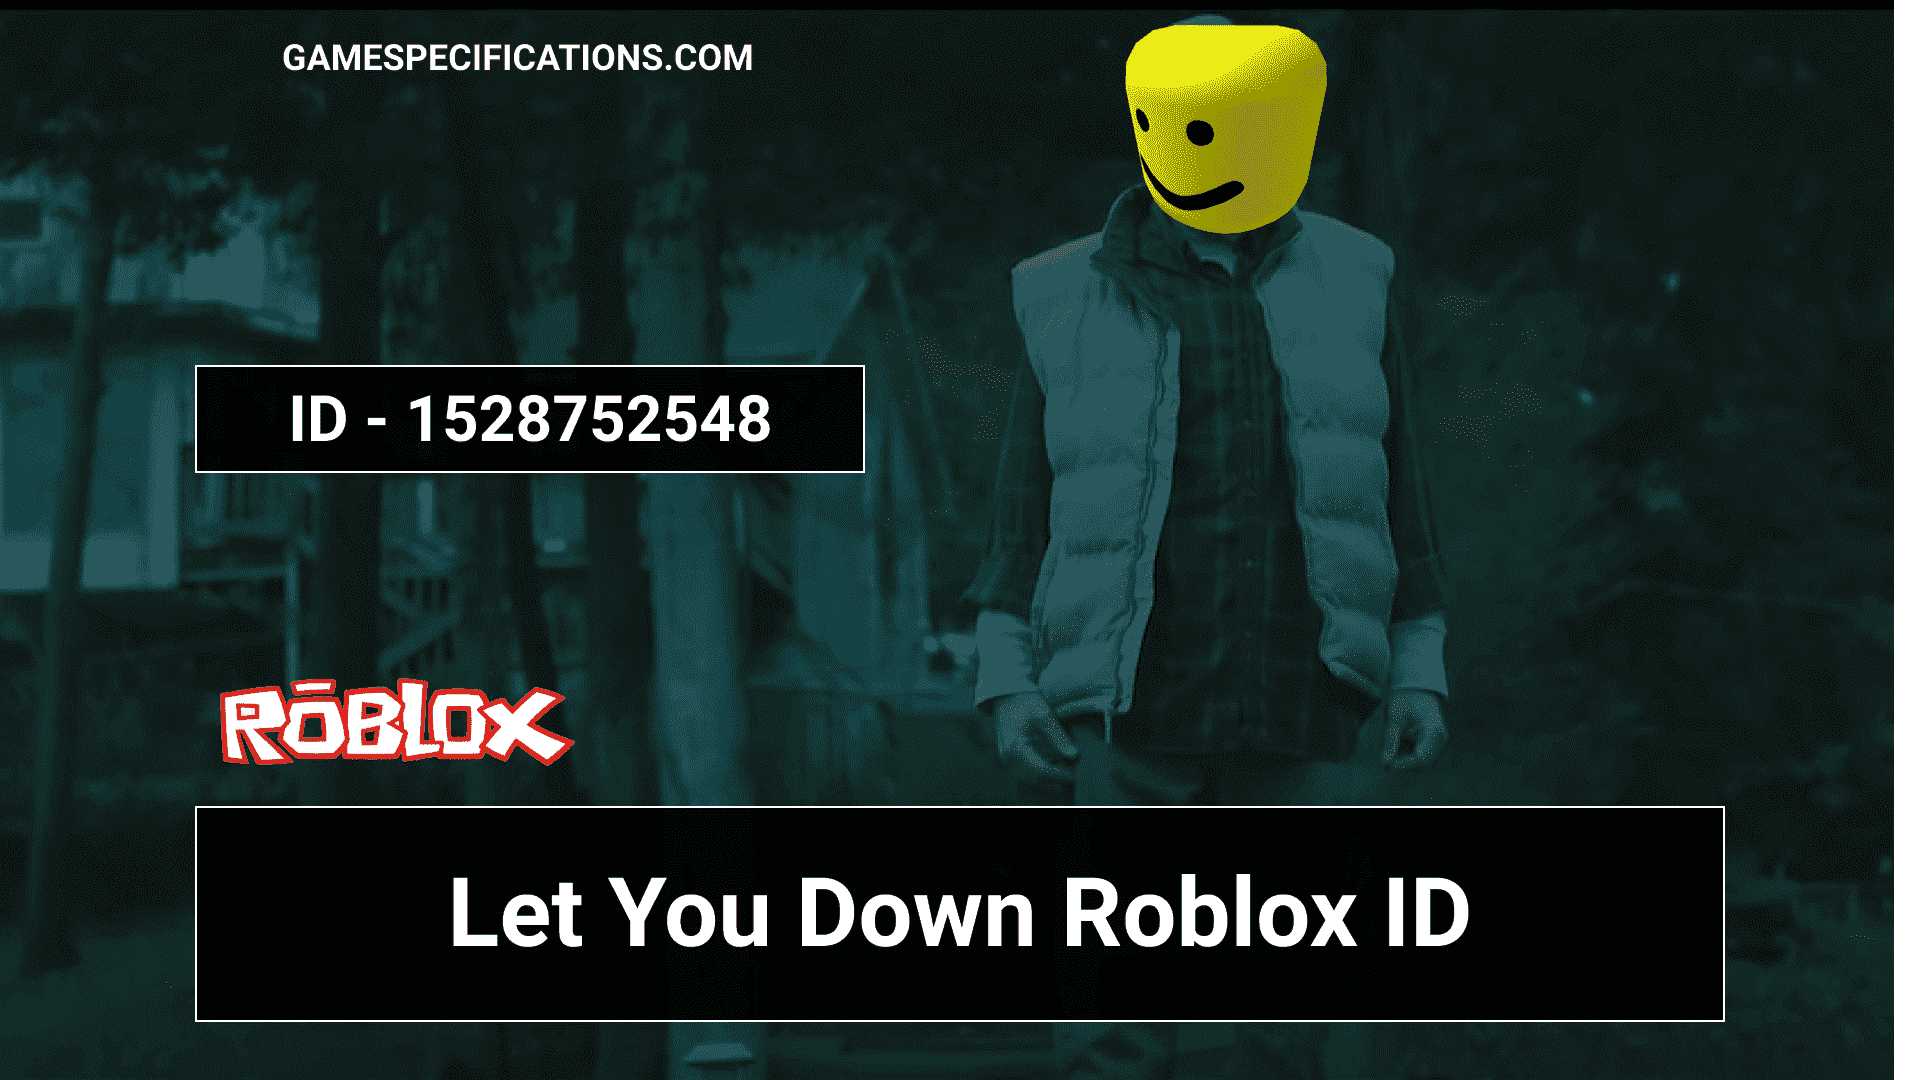 Let You Down Roblox Id Codes To Play The Nf Music 2021 Game Specifications - roblox id annoying